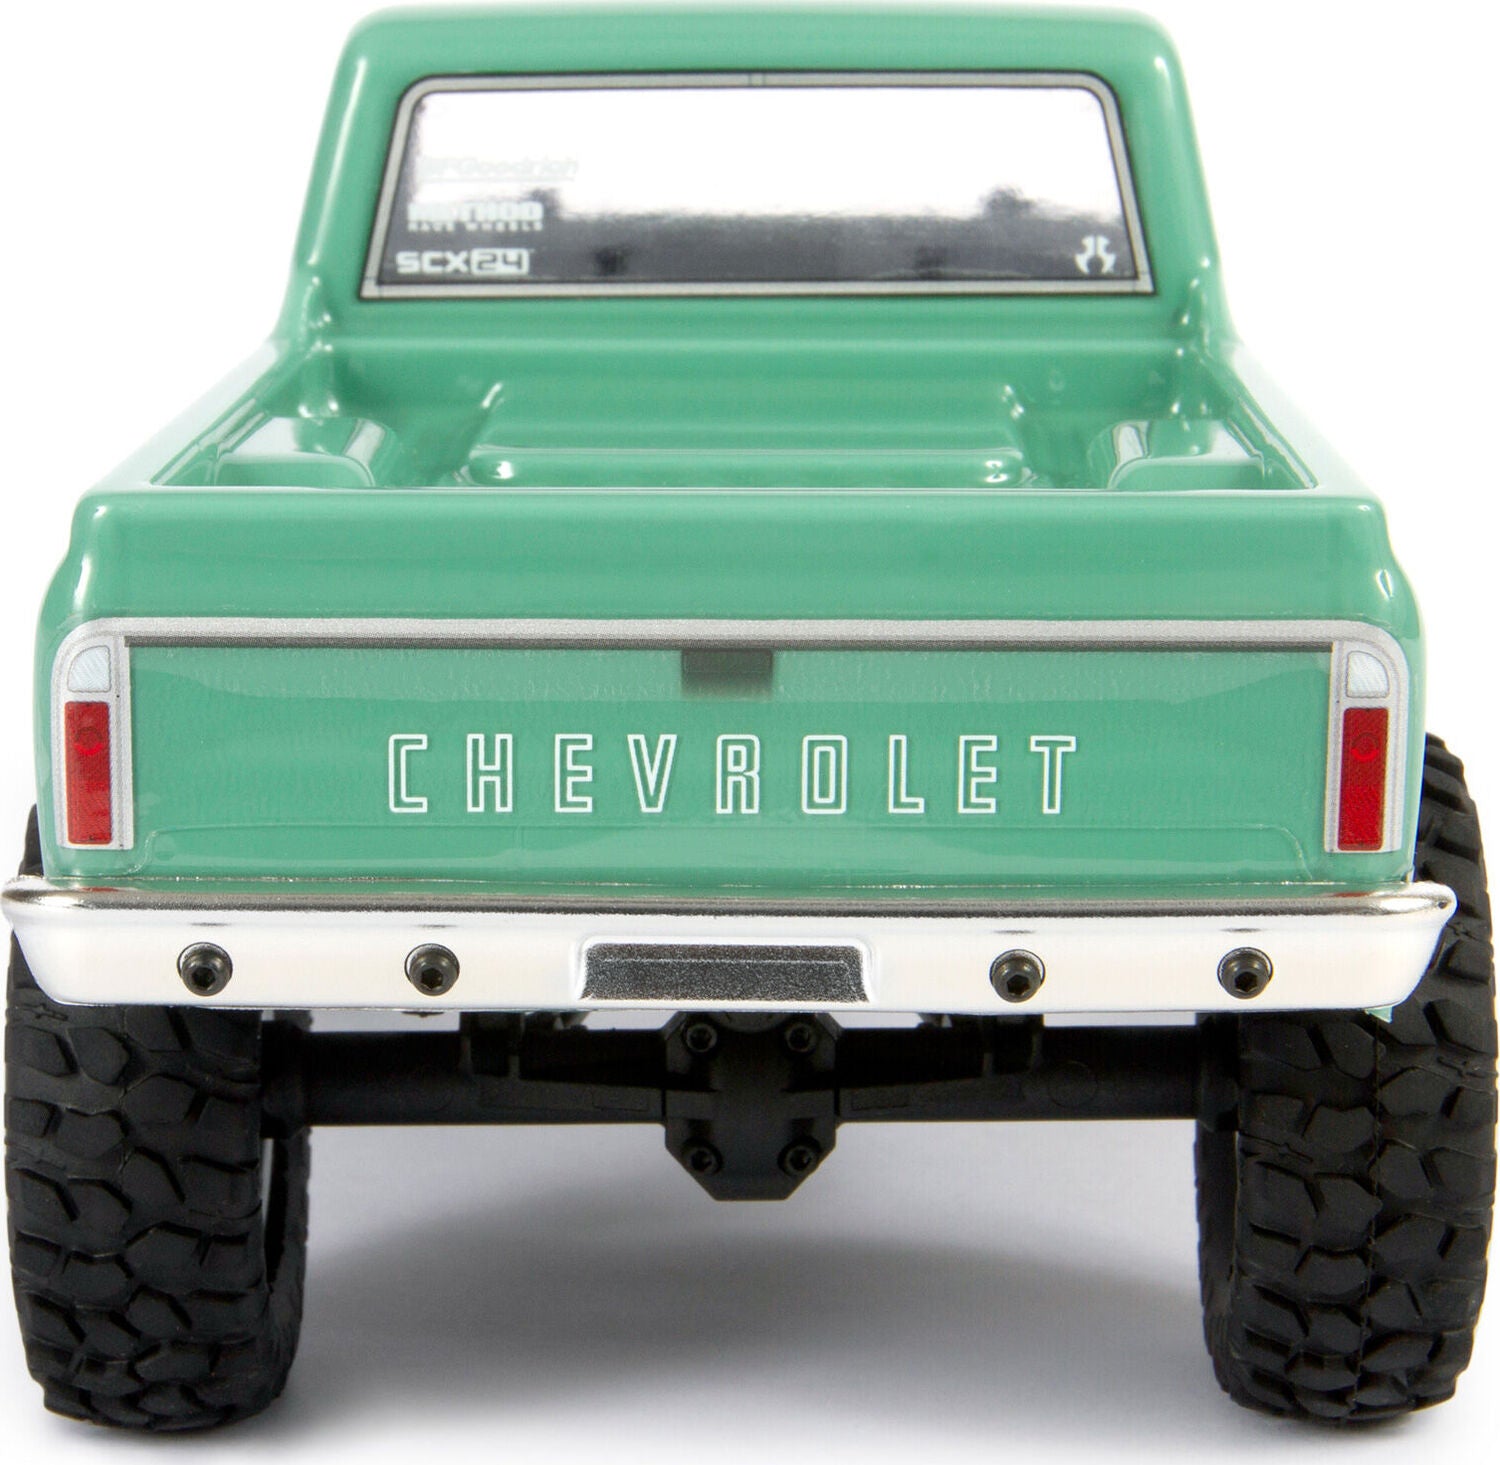 1/24 SCX24 1967 Chevrolet C10 4WD Truck Brushed RTR, Green